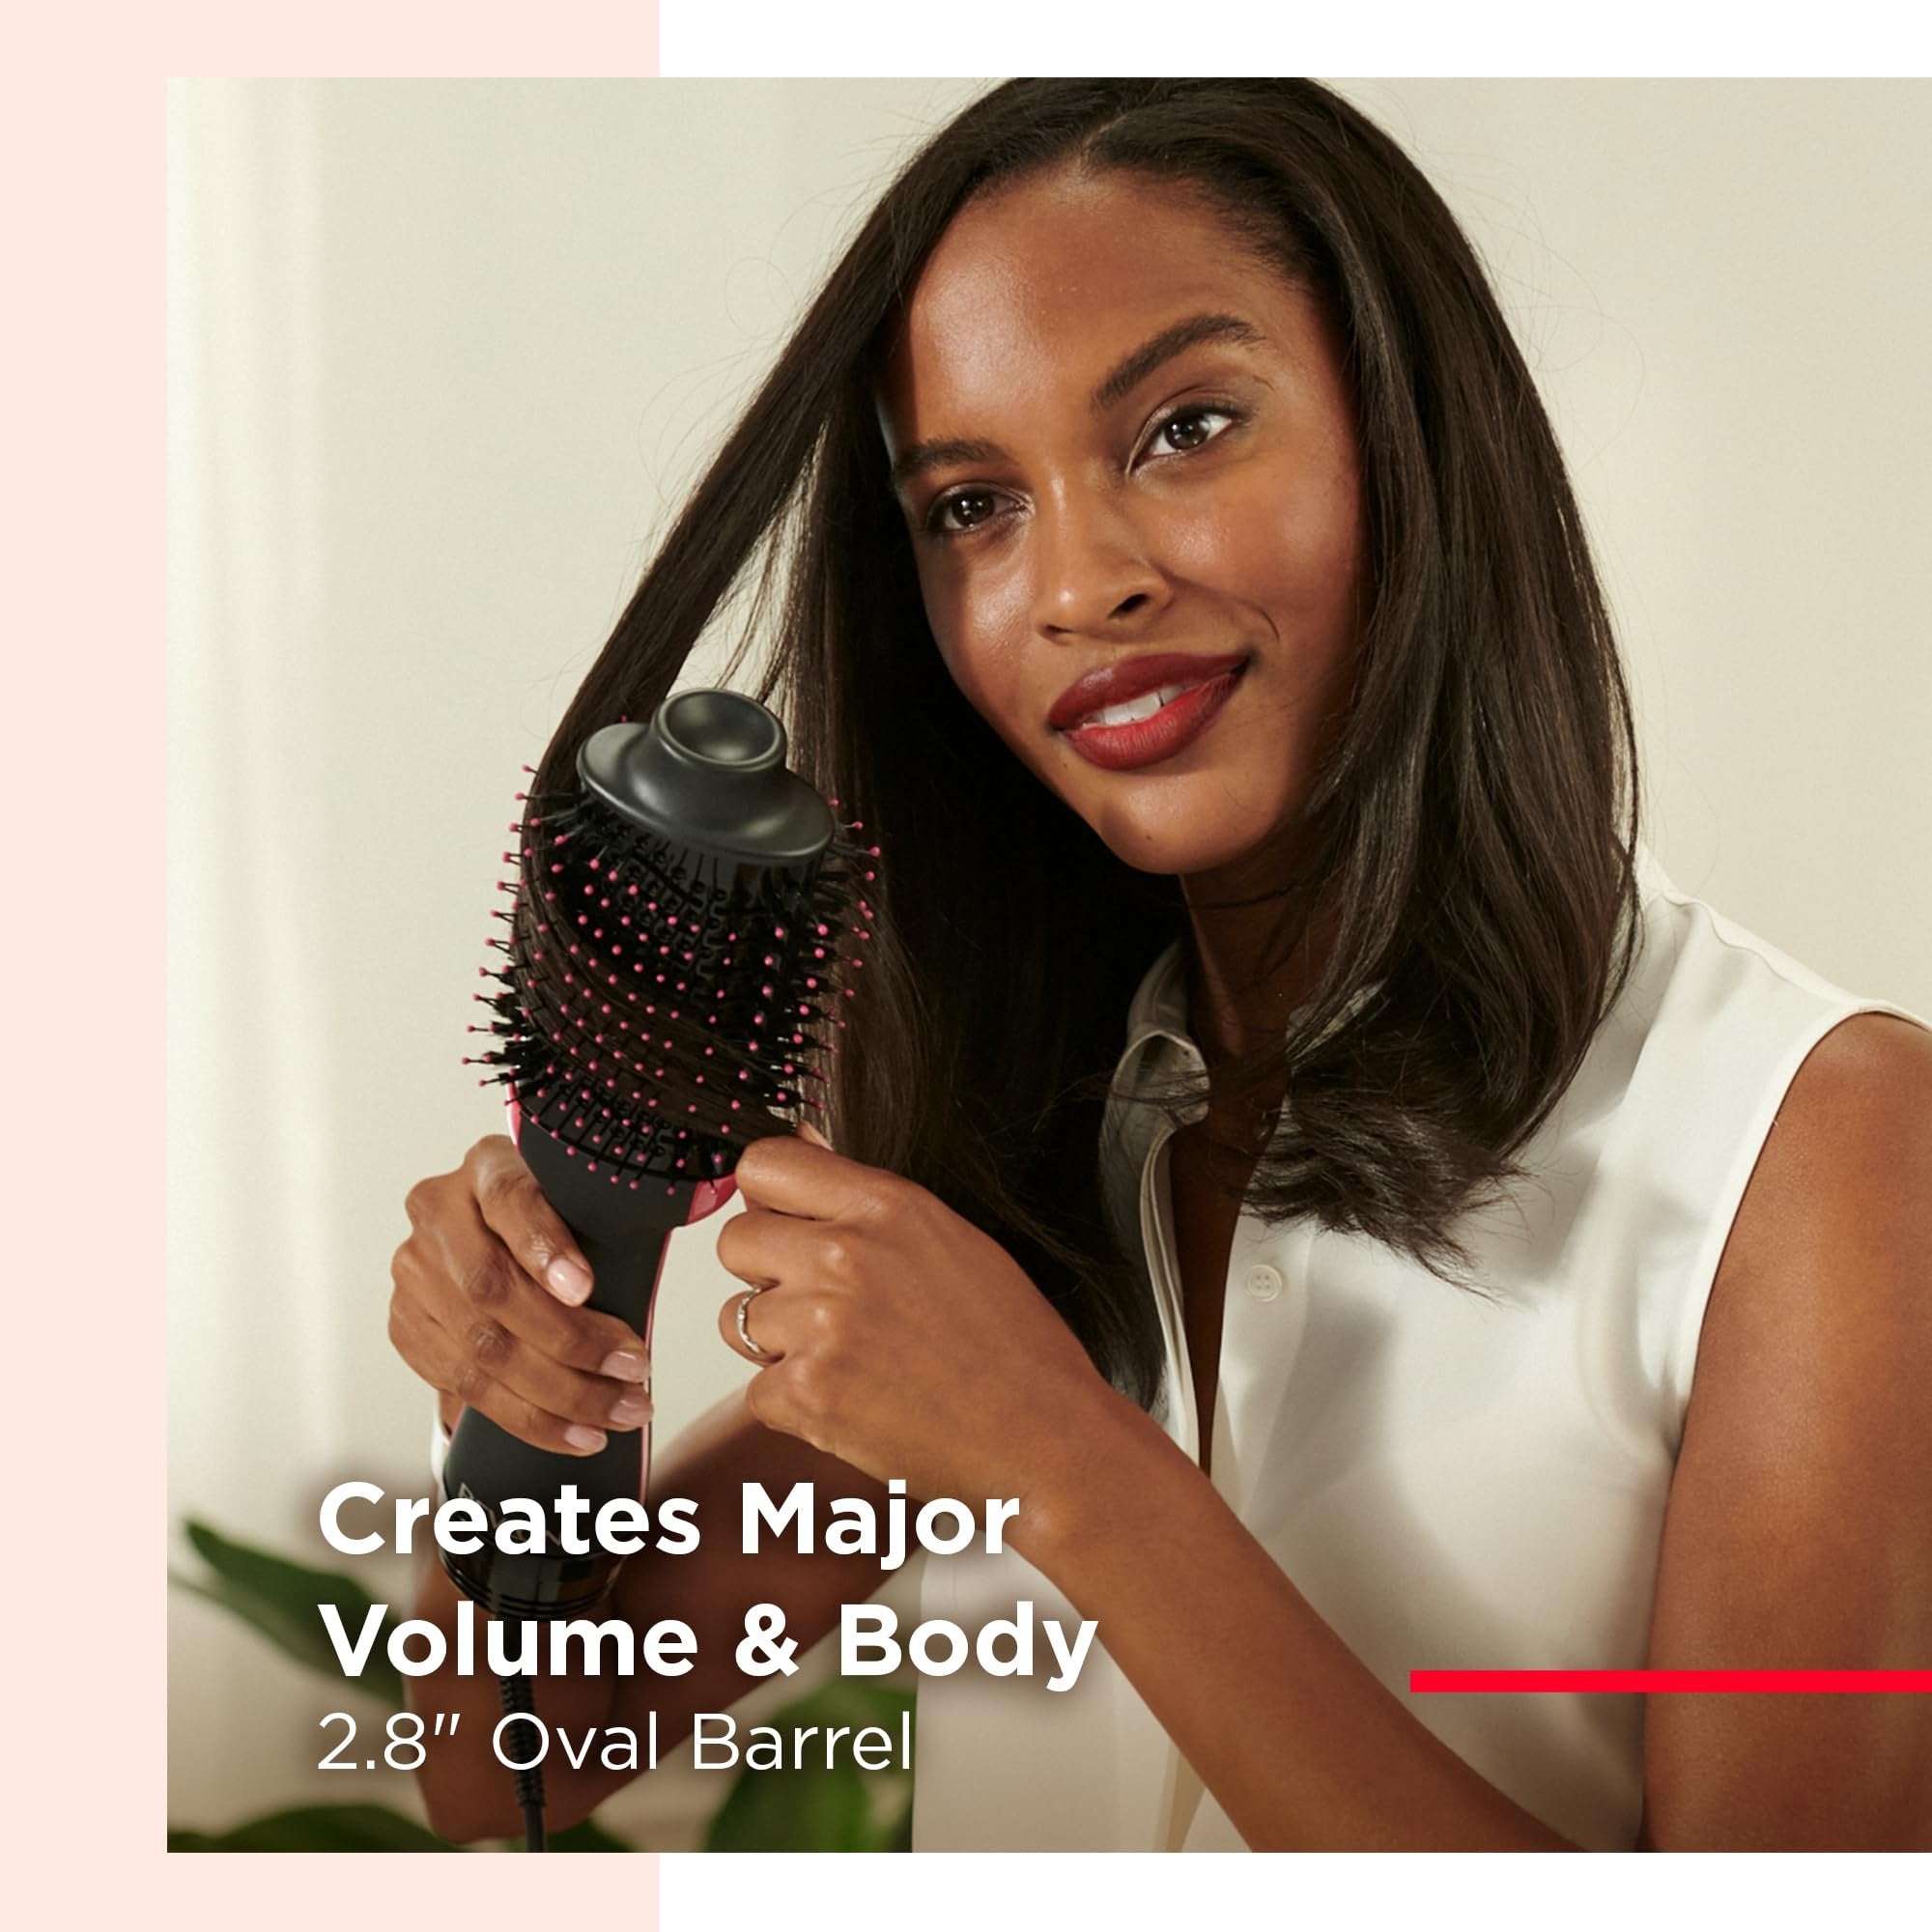 REVLON One-Step Volumizer Enhanced 1.0 Hair Dryer and Hot Air Brush | Now with Improved Motor | Amazon Exclusive (Black)